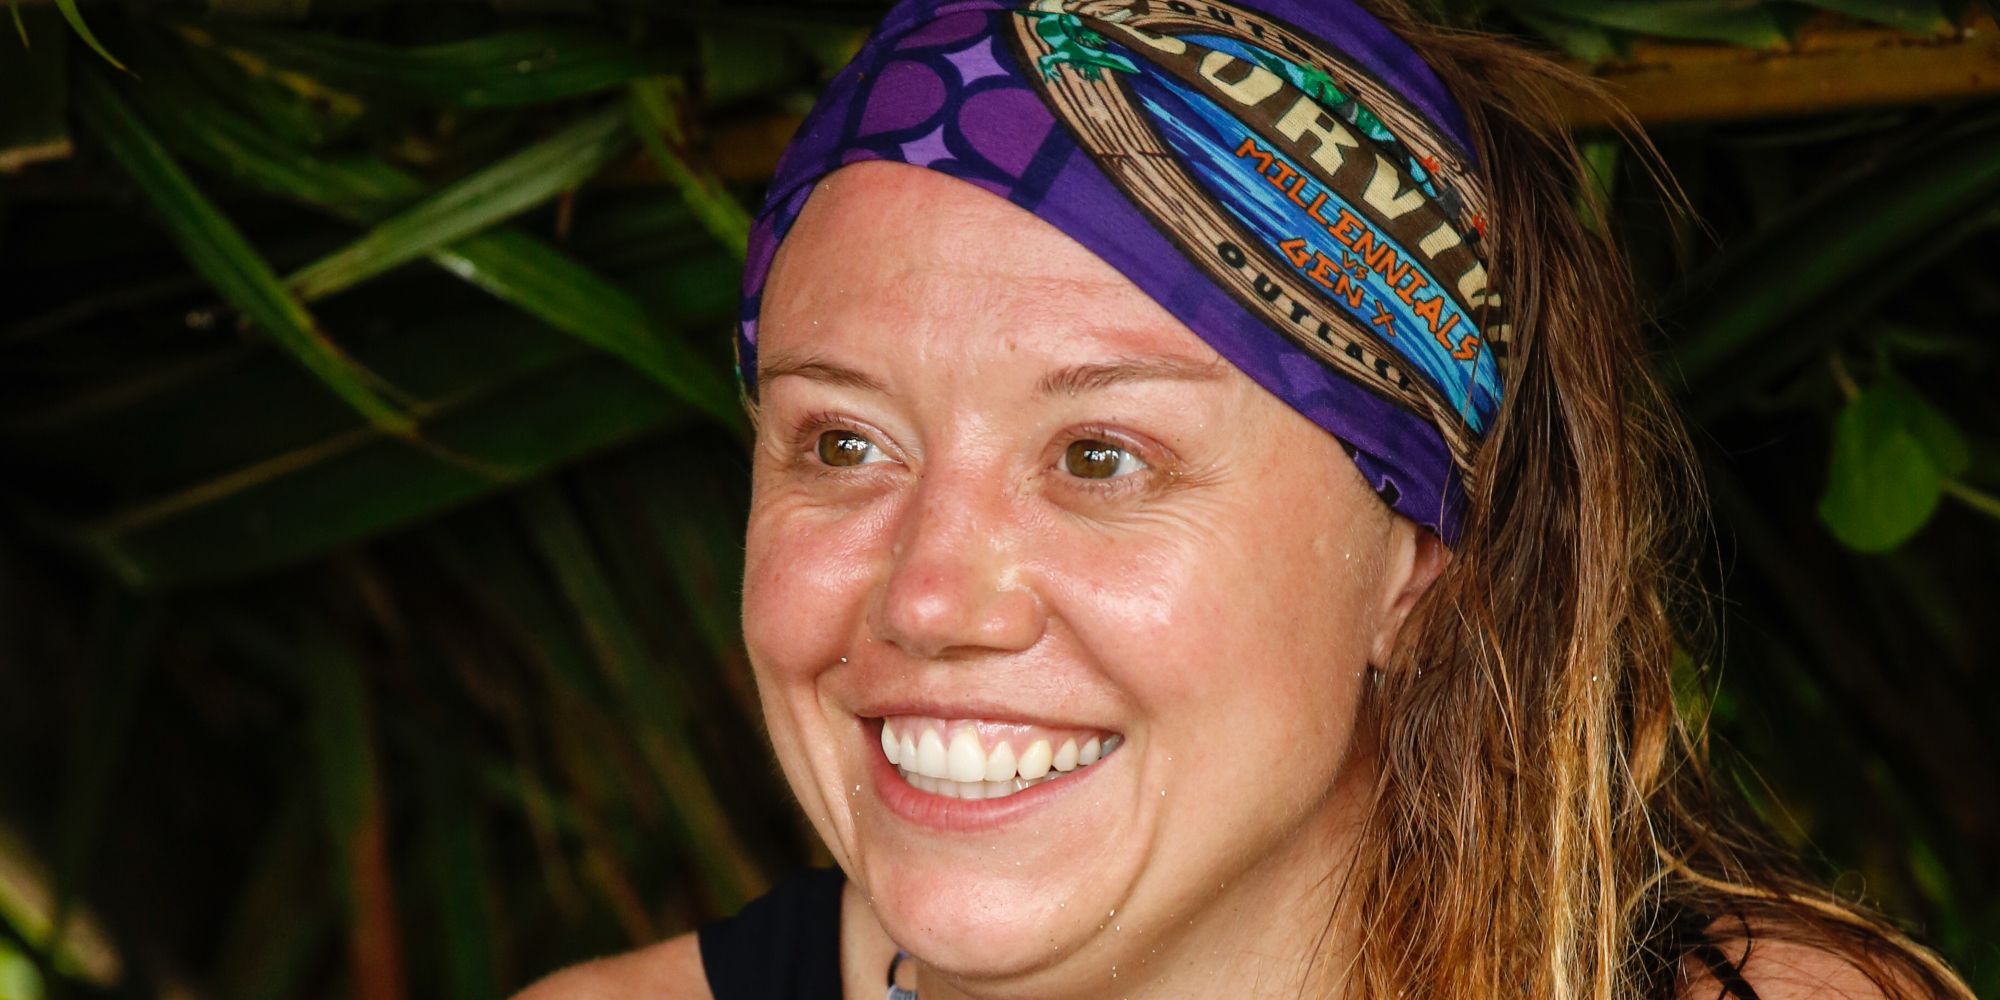 Jessica Lewis smiling while looking to the distance in Survivor.